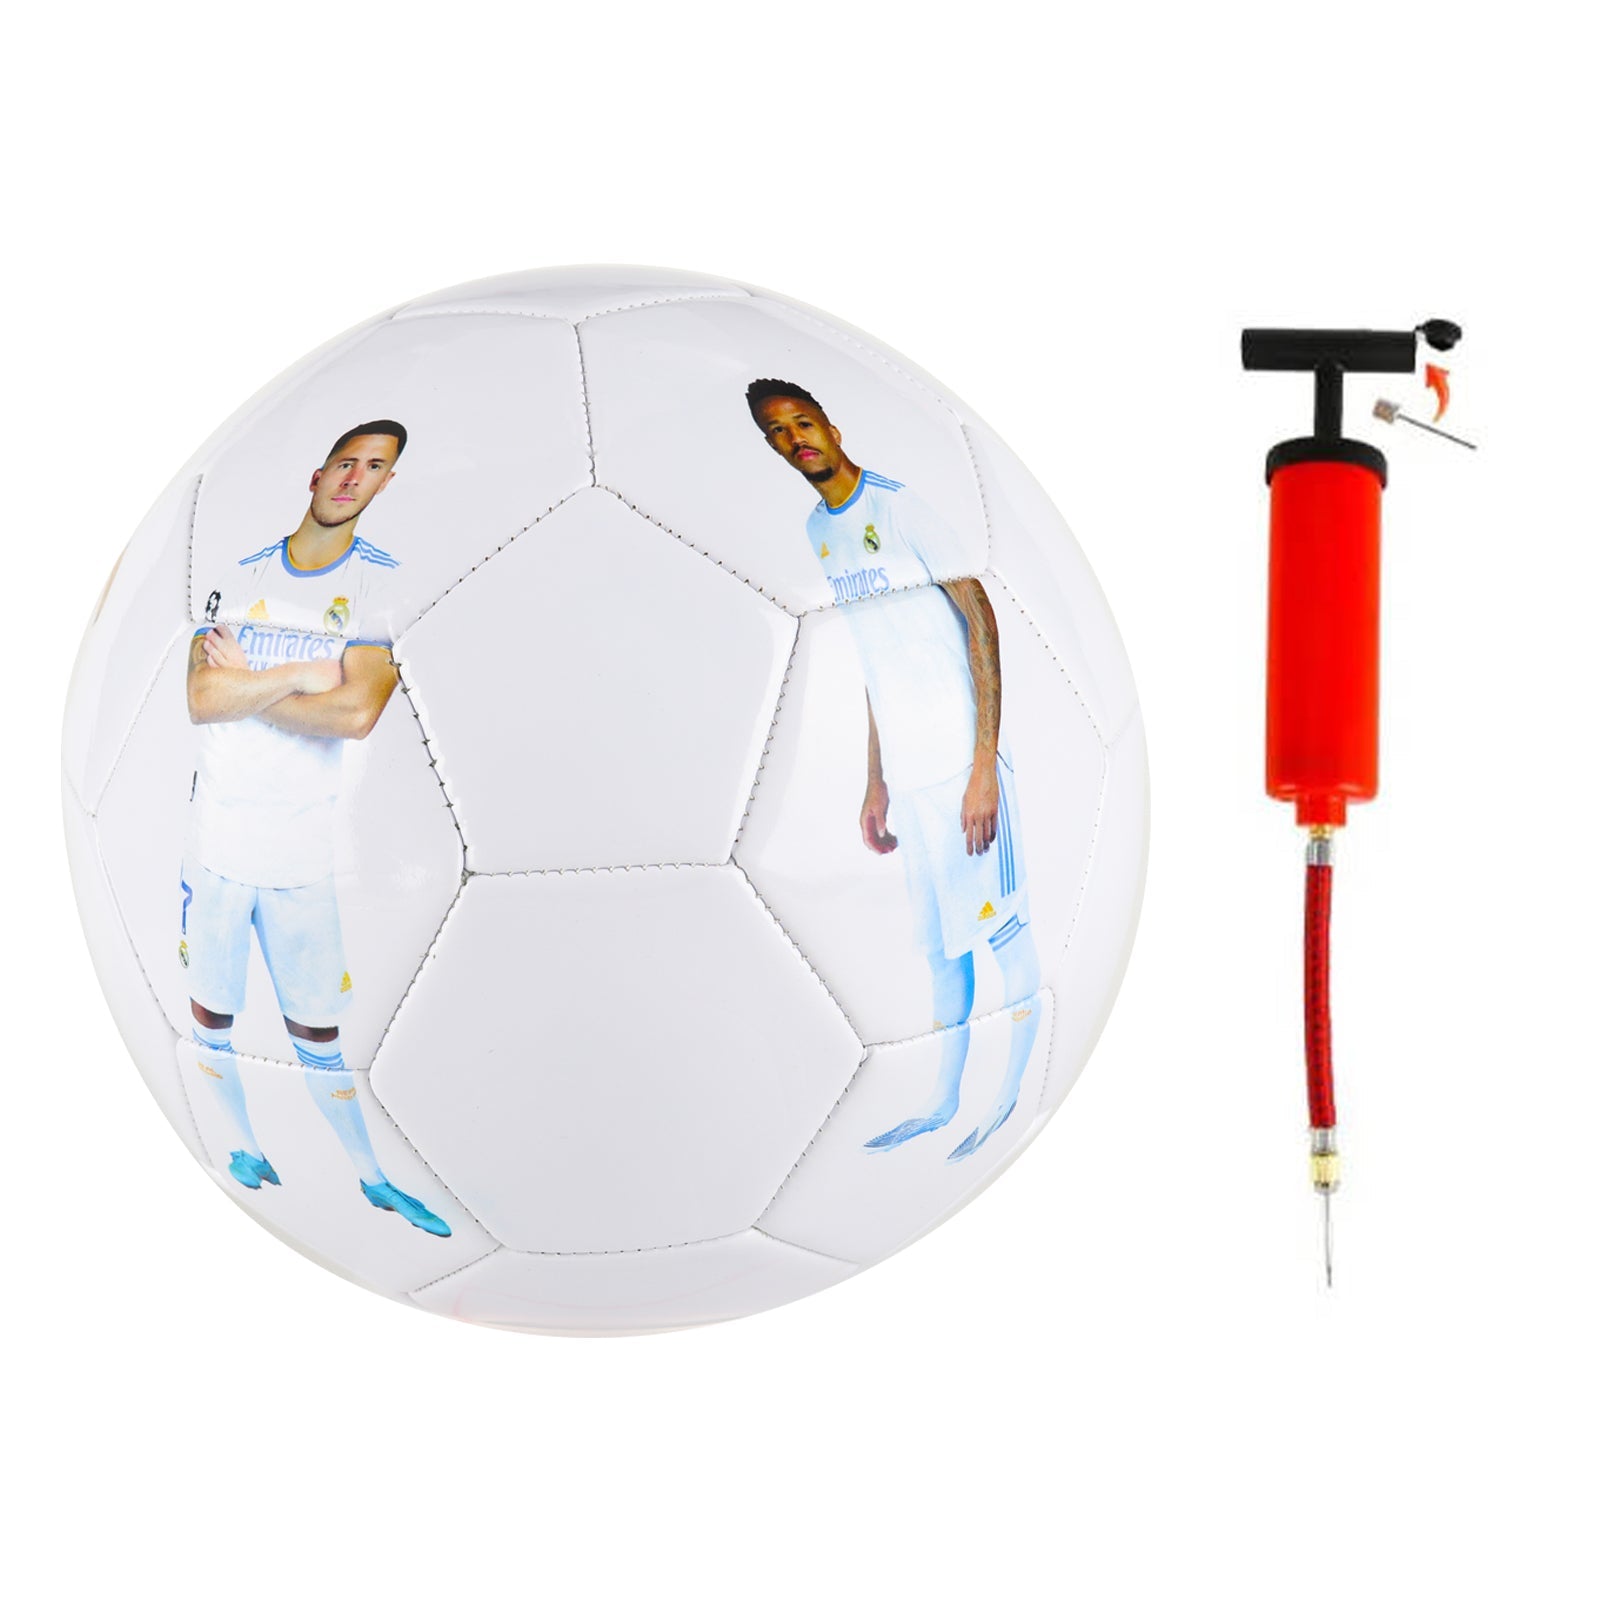 Personalized Custom Soccer Ball For Soccer Players Gift - Family Watchs